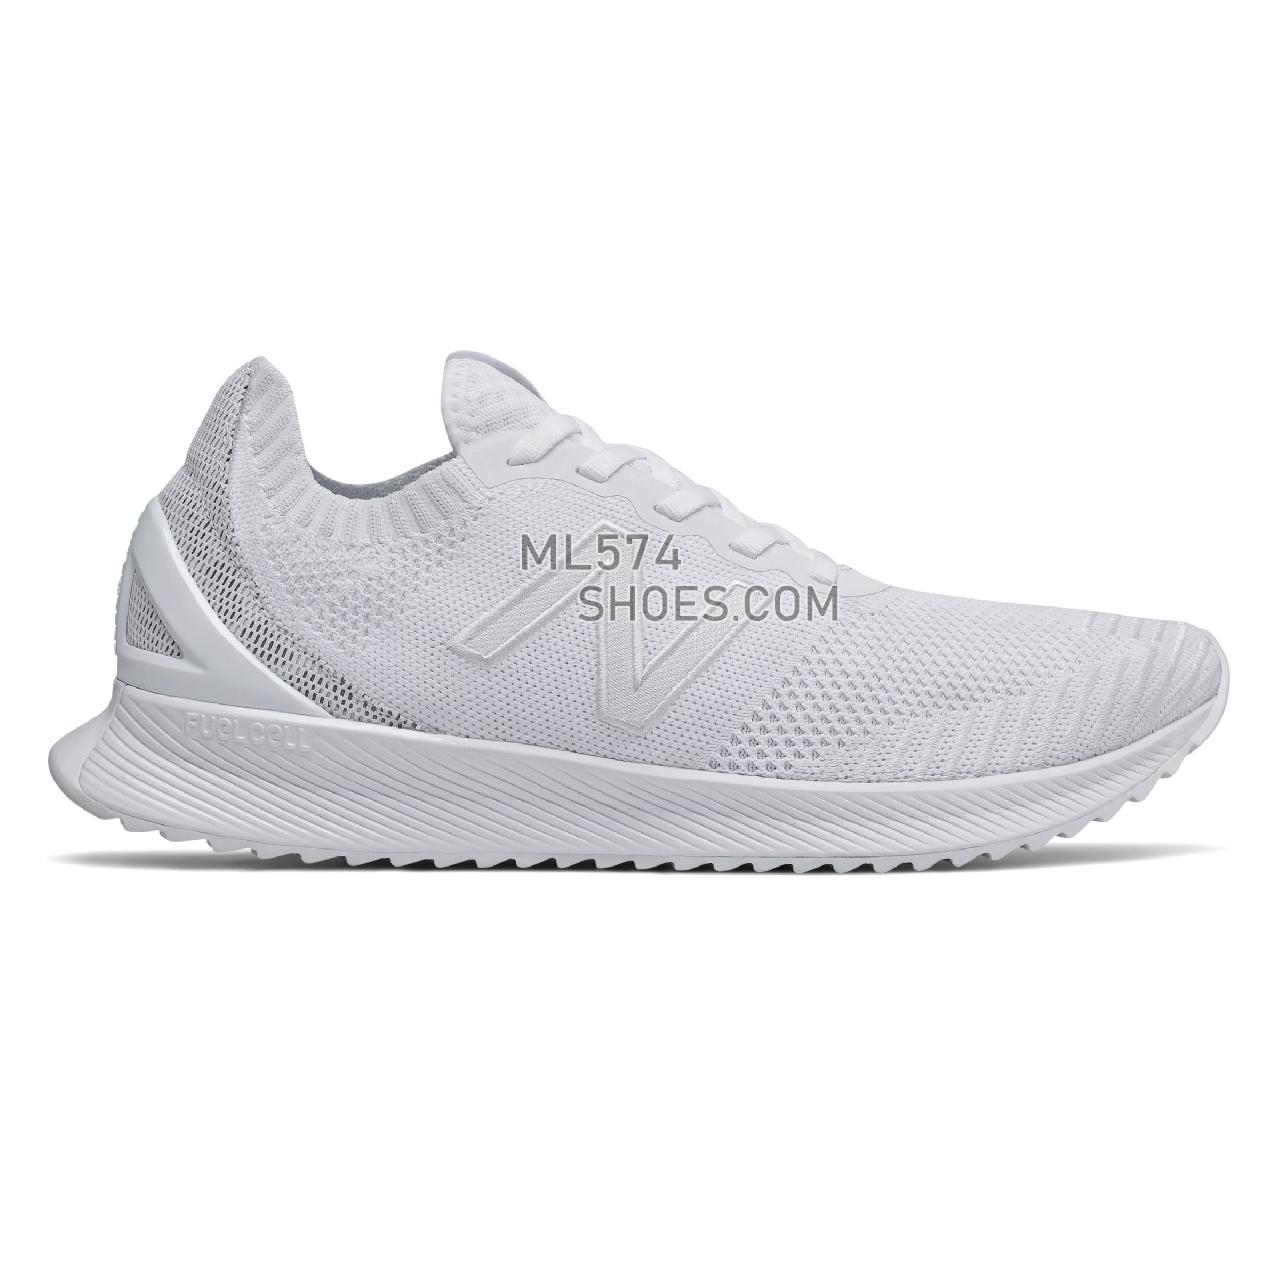 New Balance FuelCell Echo - Men's Fuelcell Sleek And LightWeight - White - MFCECCW